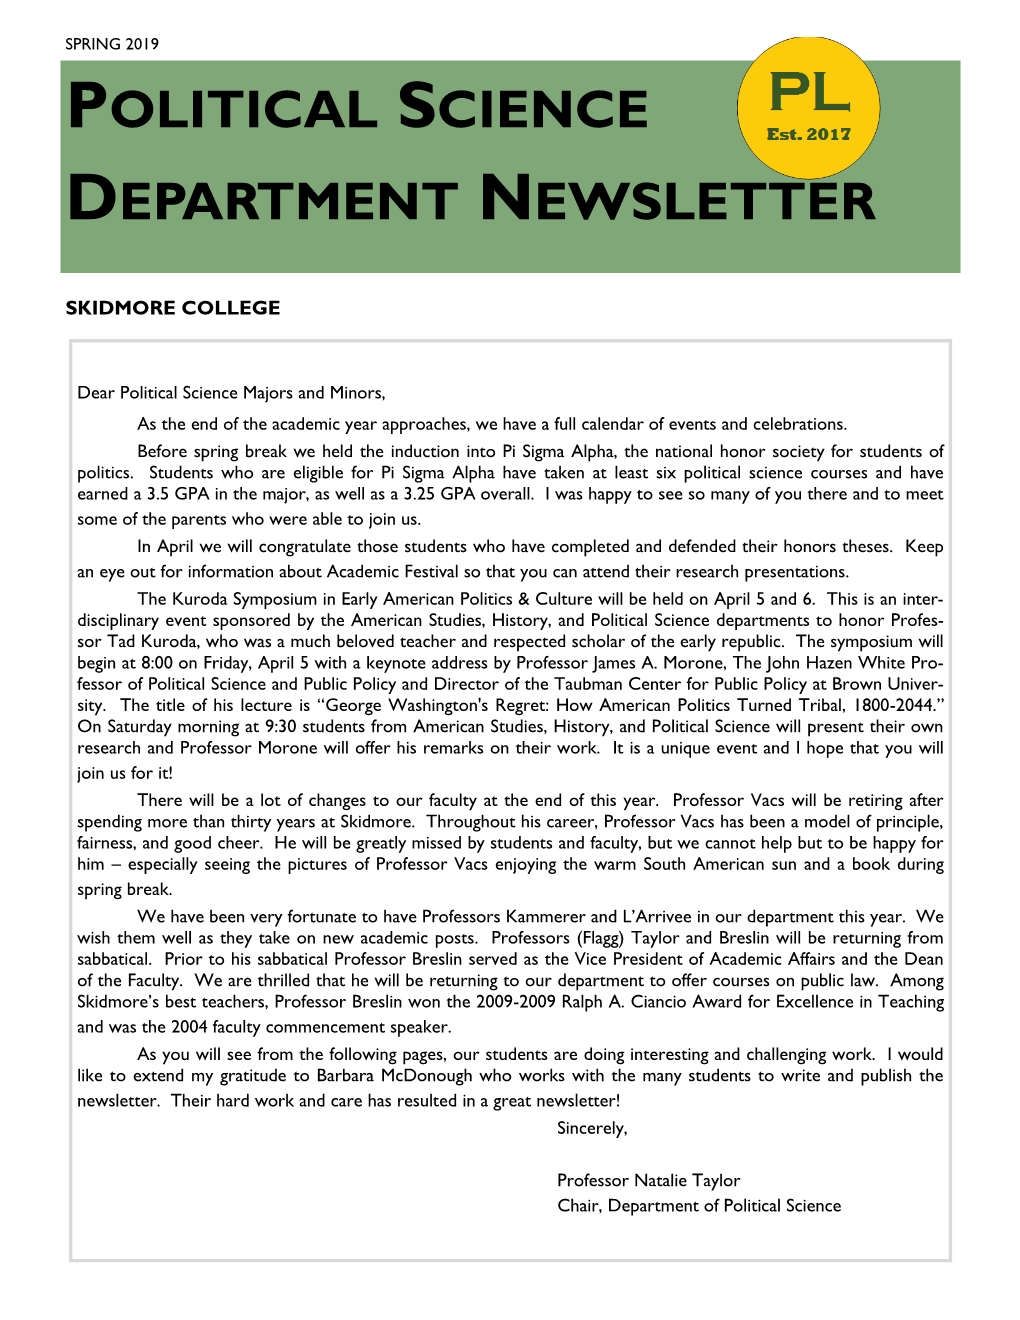 Political Science Department Newsletter